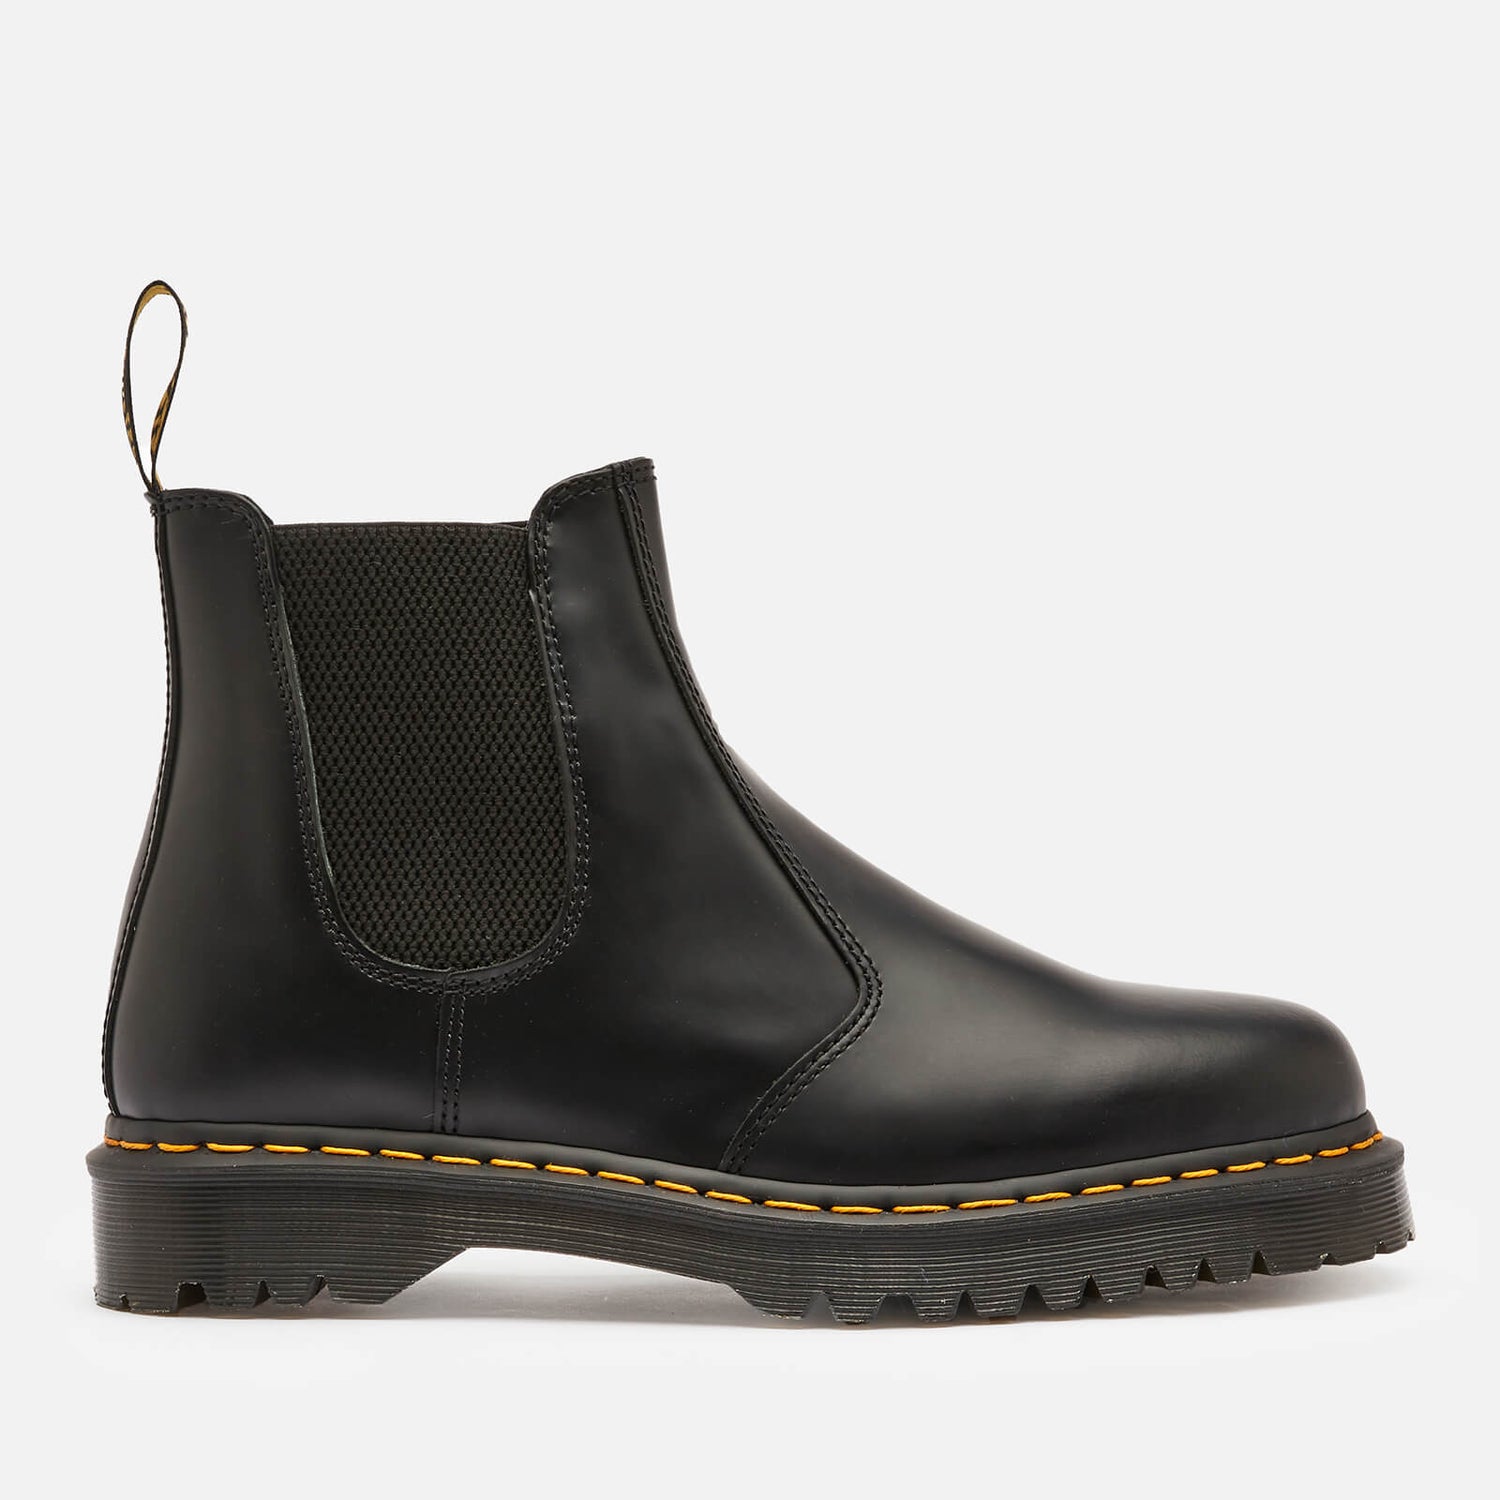 Dr. Martens 2976 Bex Smooth Leather Chelsea Boots - Black | FREE UK ...